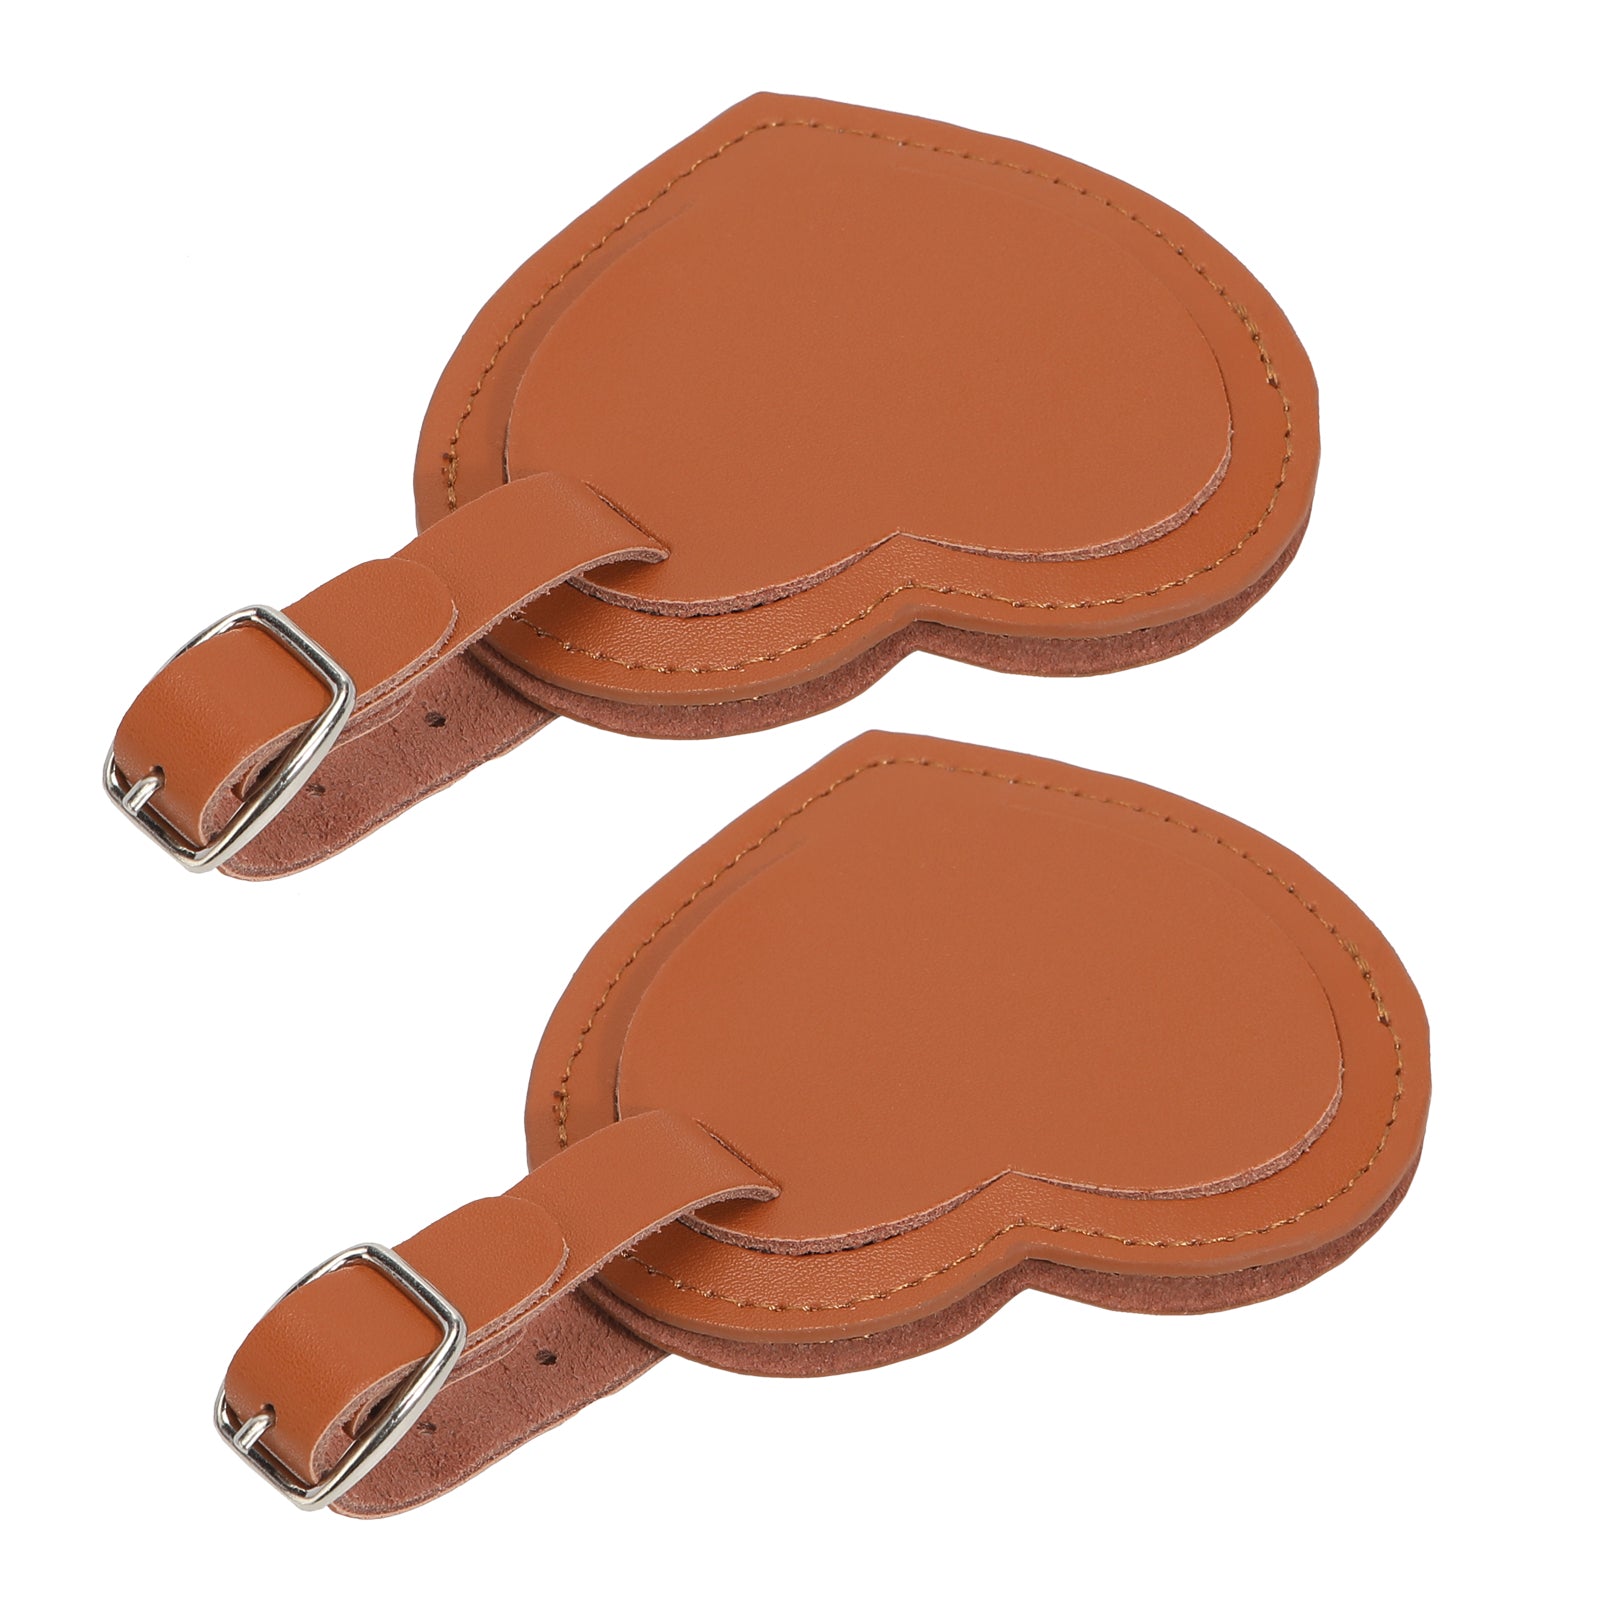 ABLE Avery Leather Luggage Tag - The Mercantile at Mill + Grain